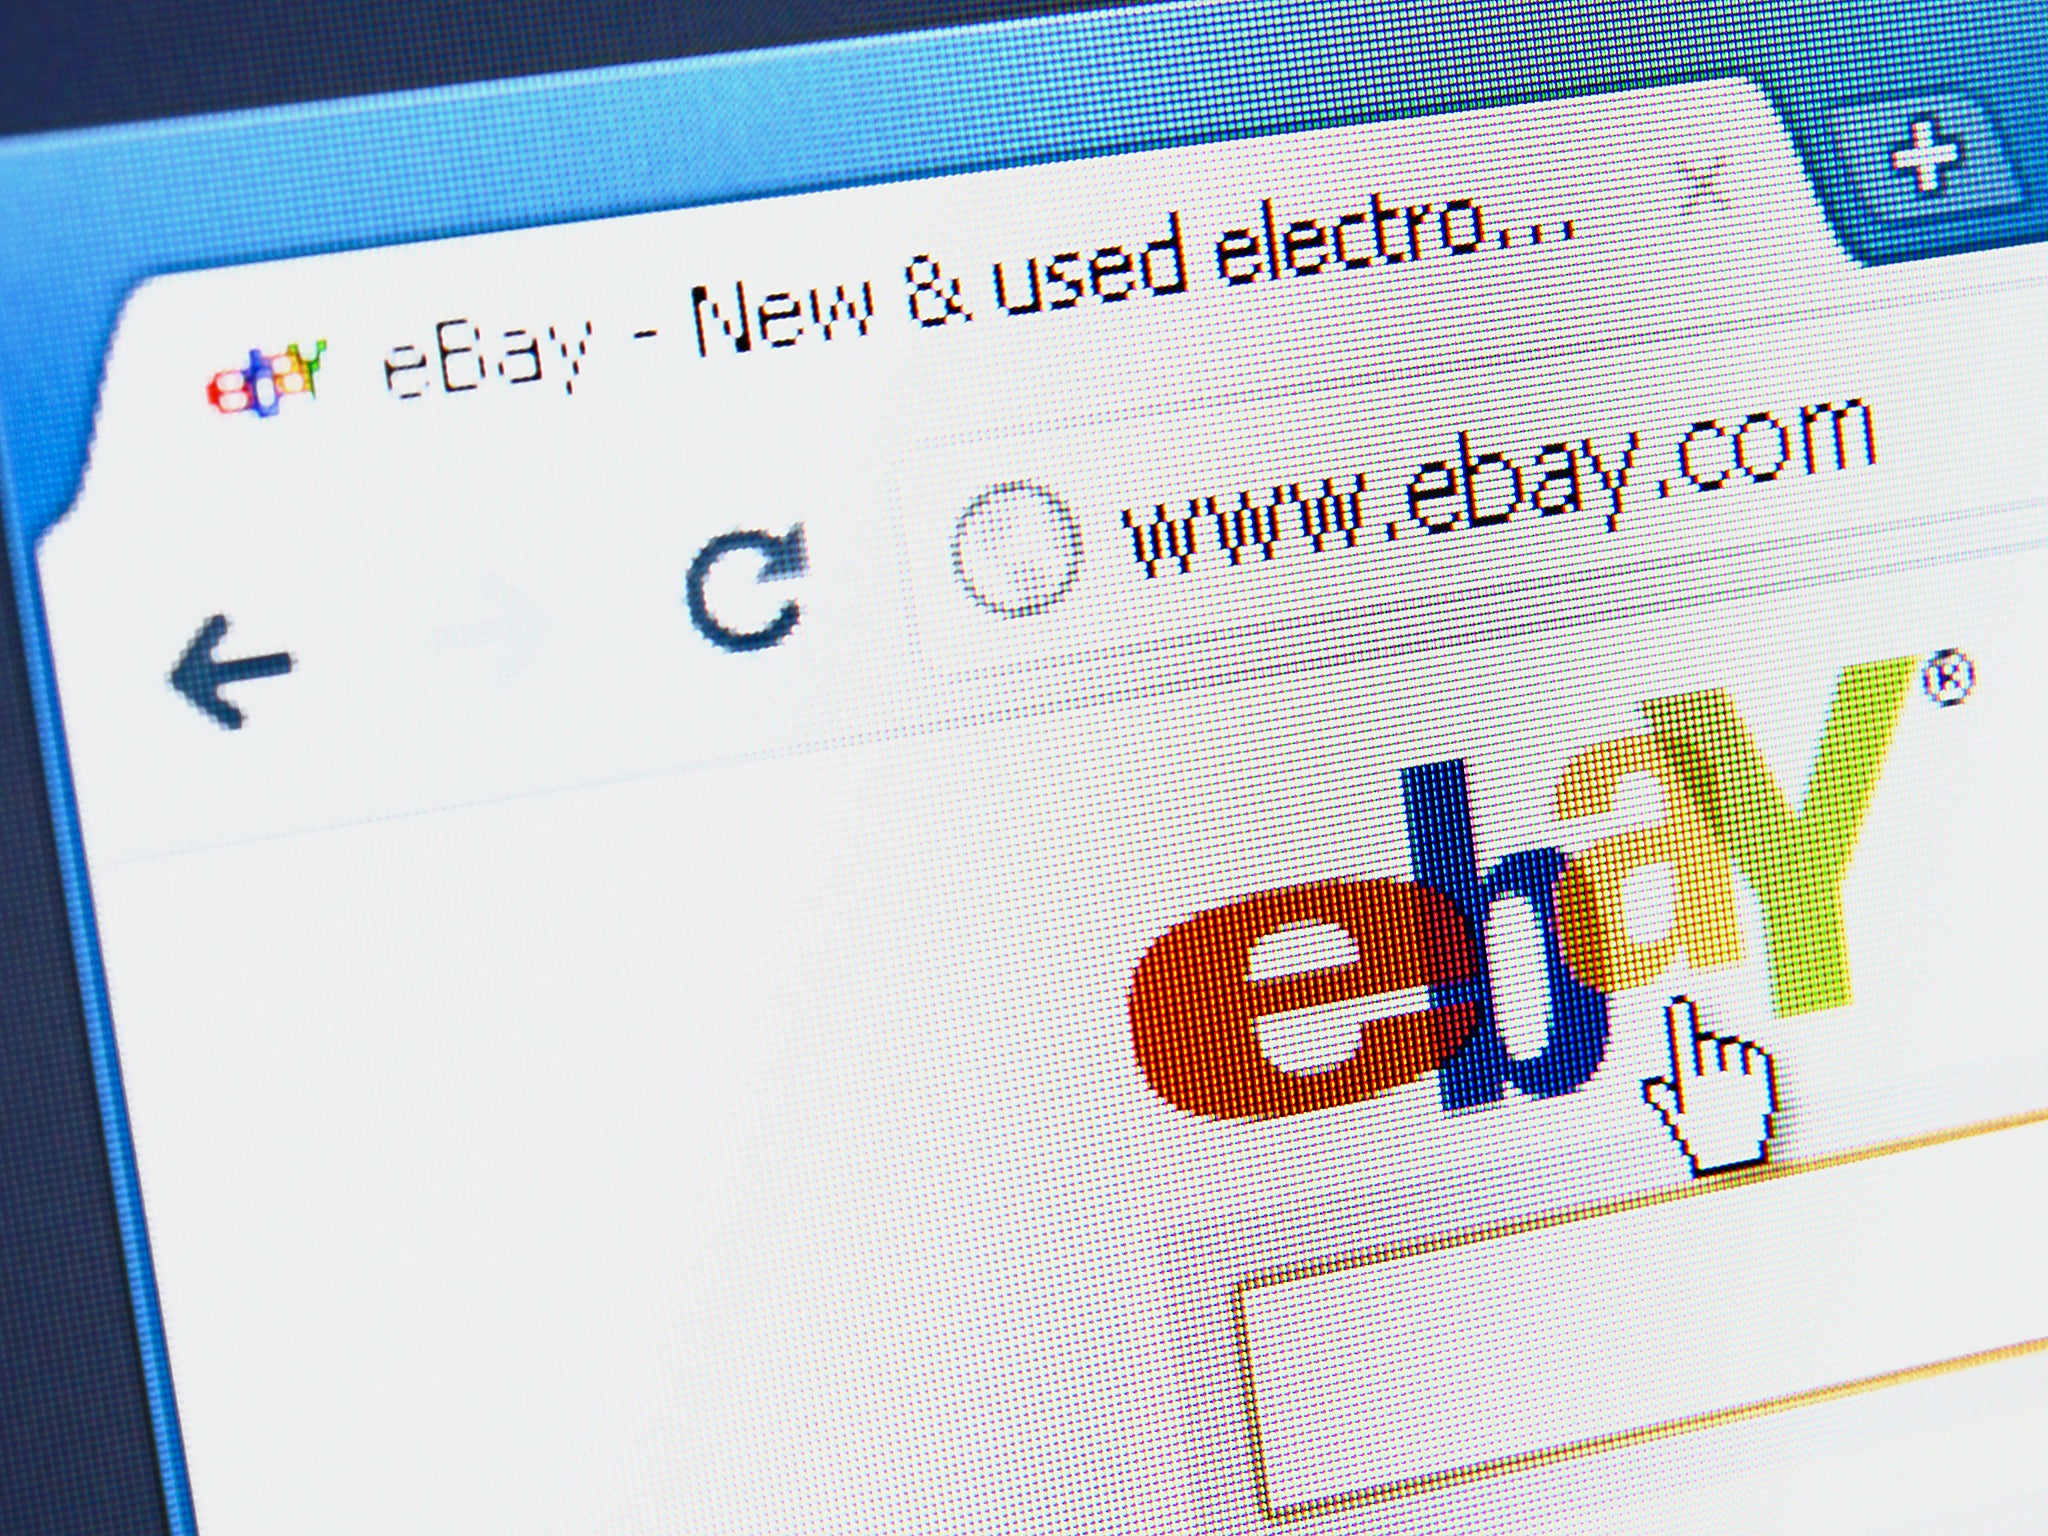 Controversy has been generated over eBay's tax affairs